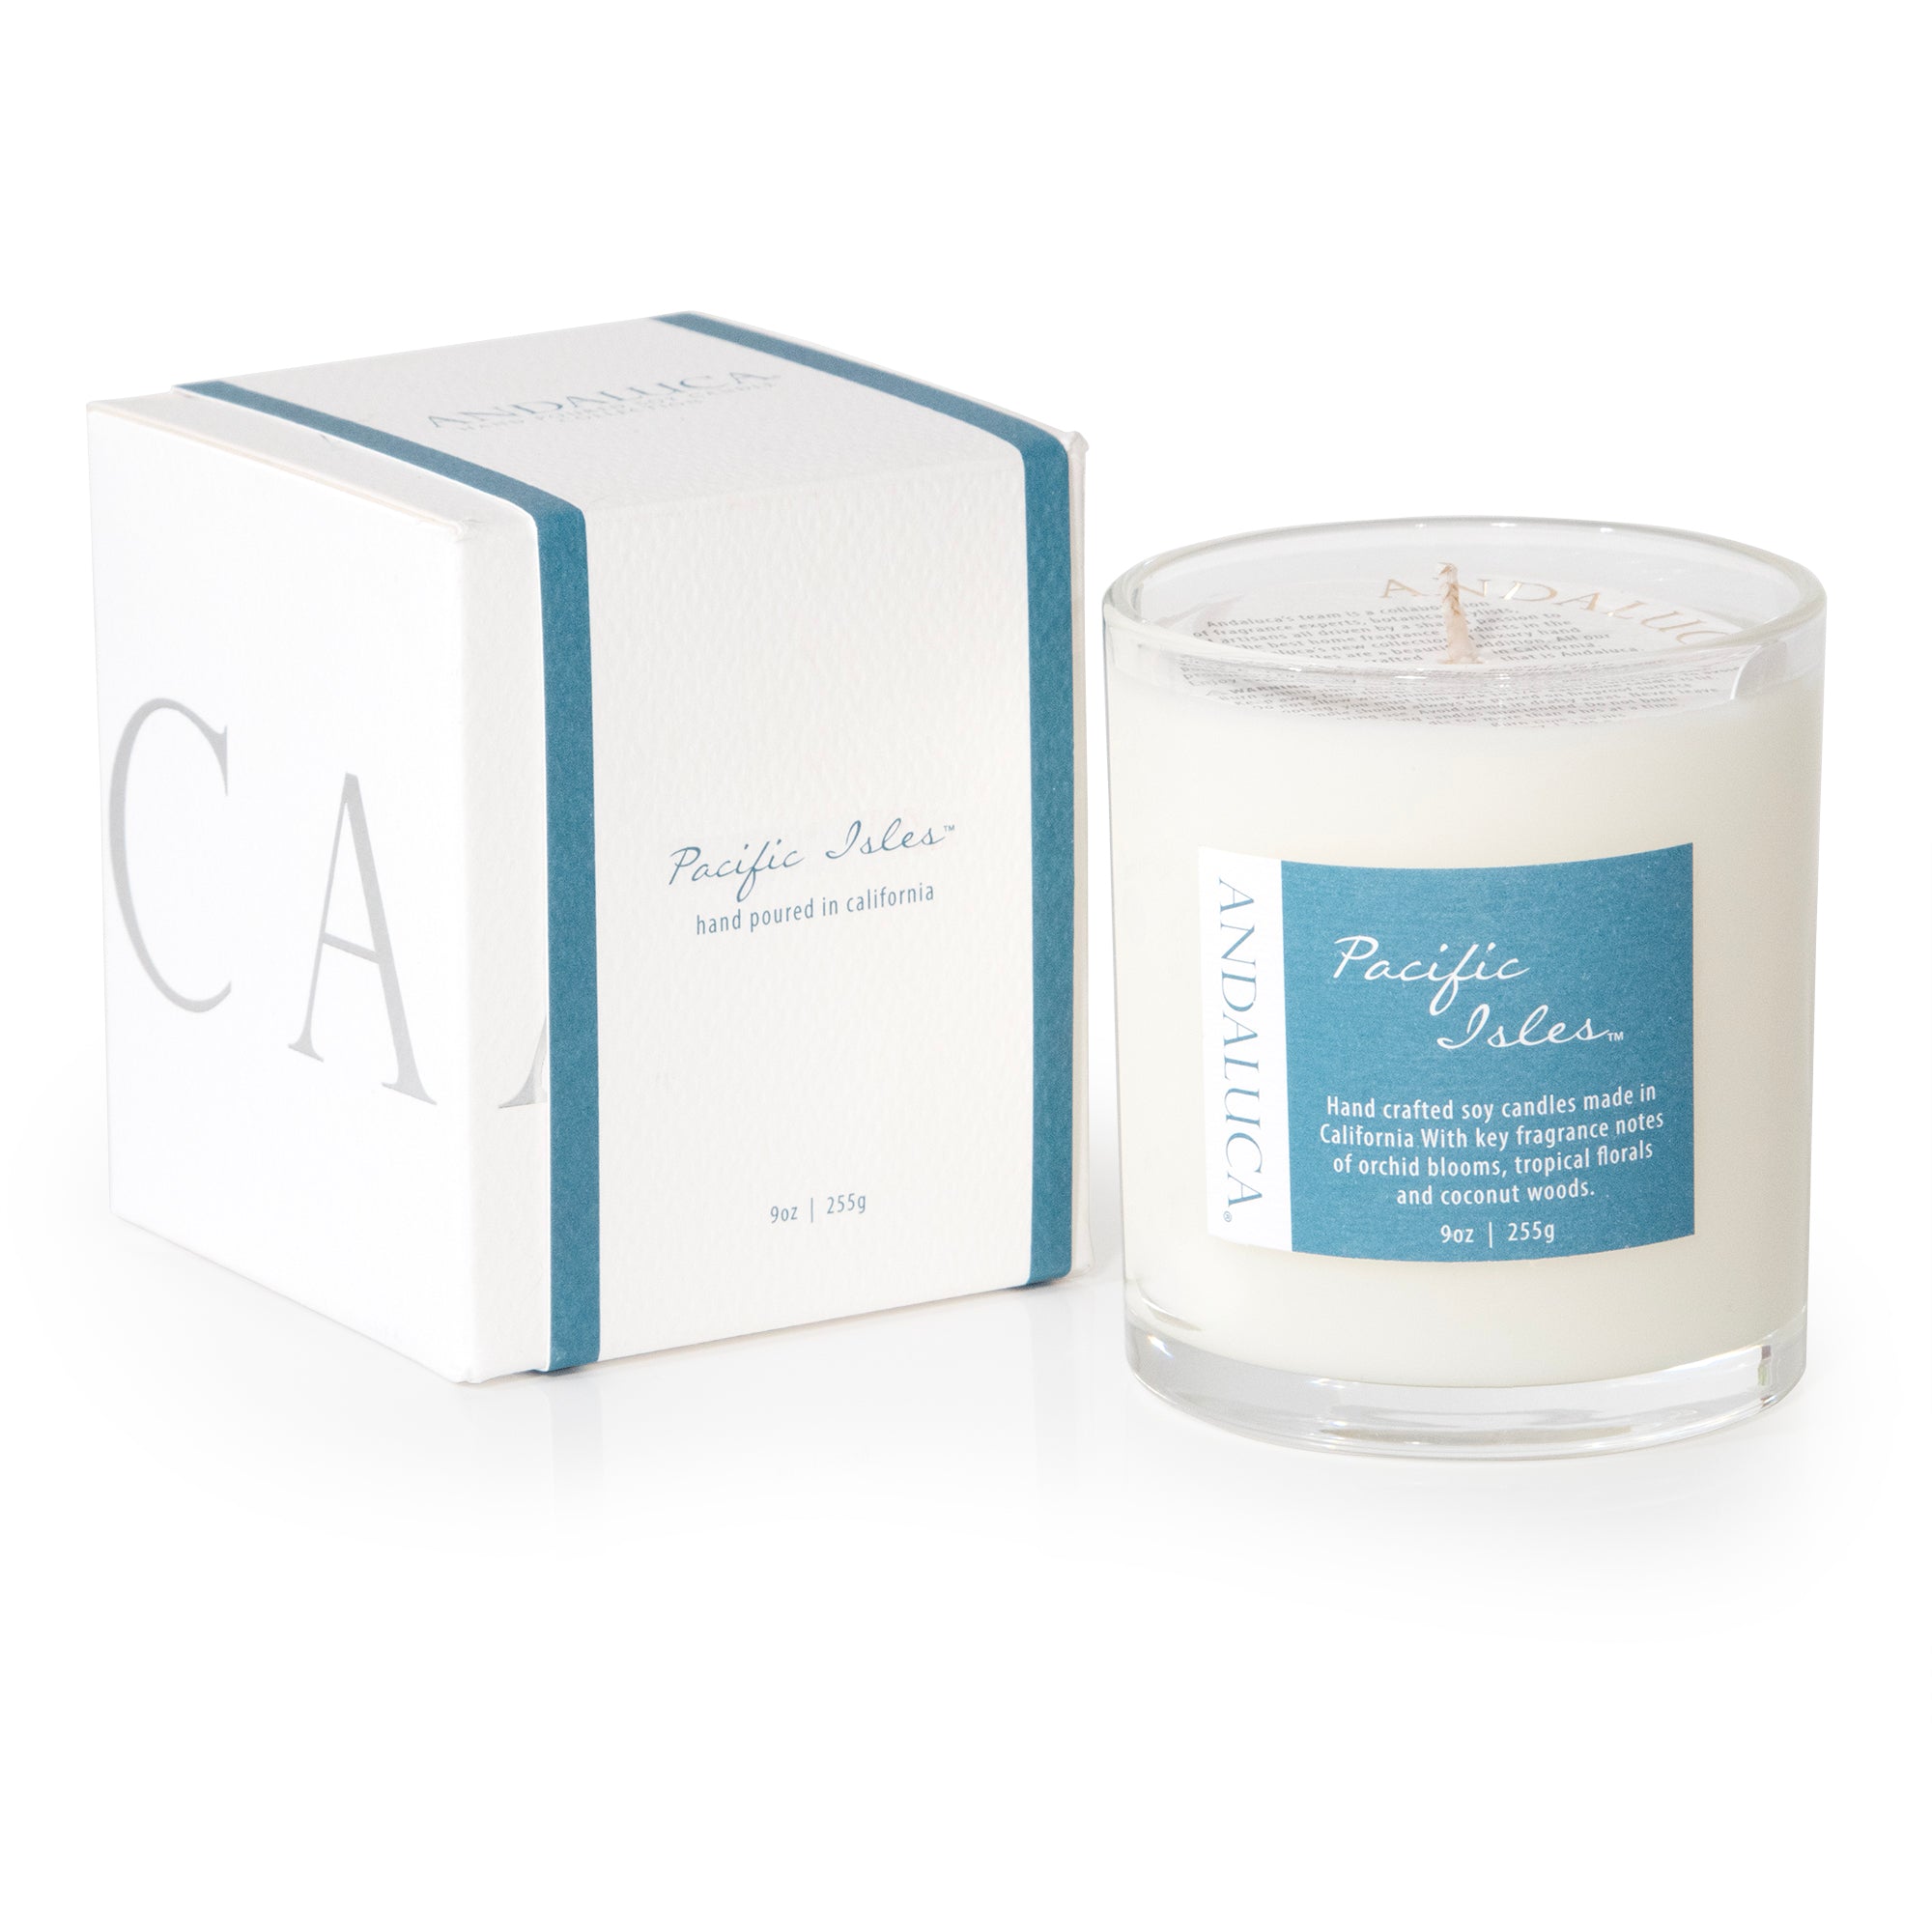 Pacific Isles 9oz Candle